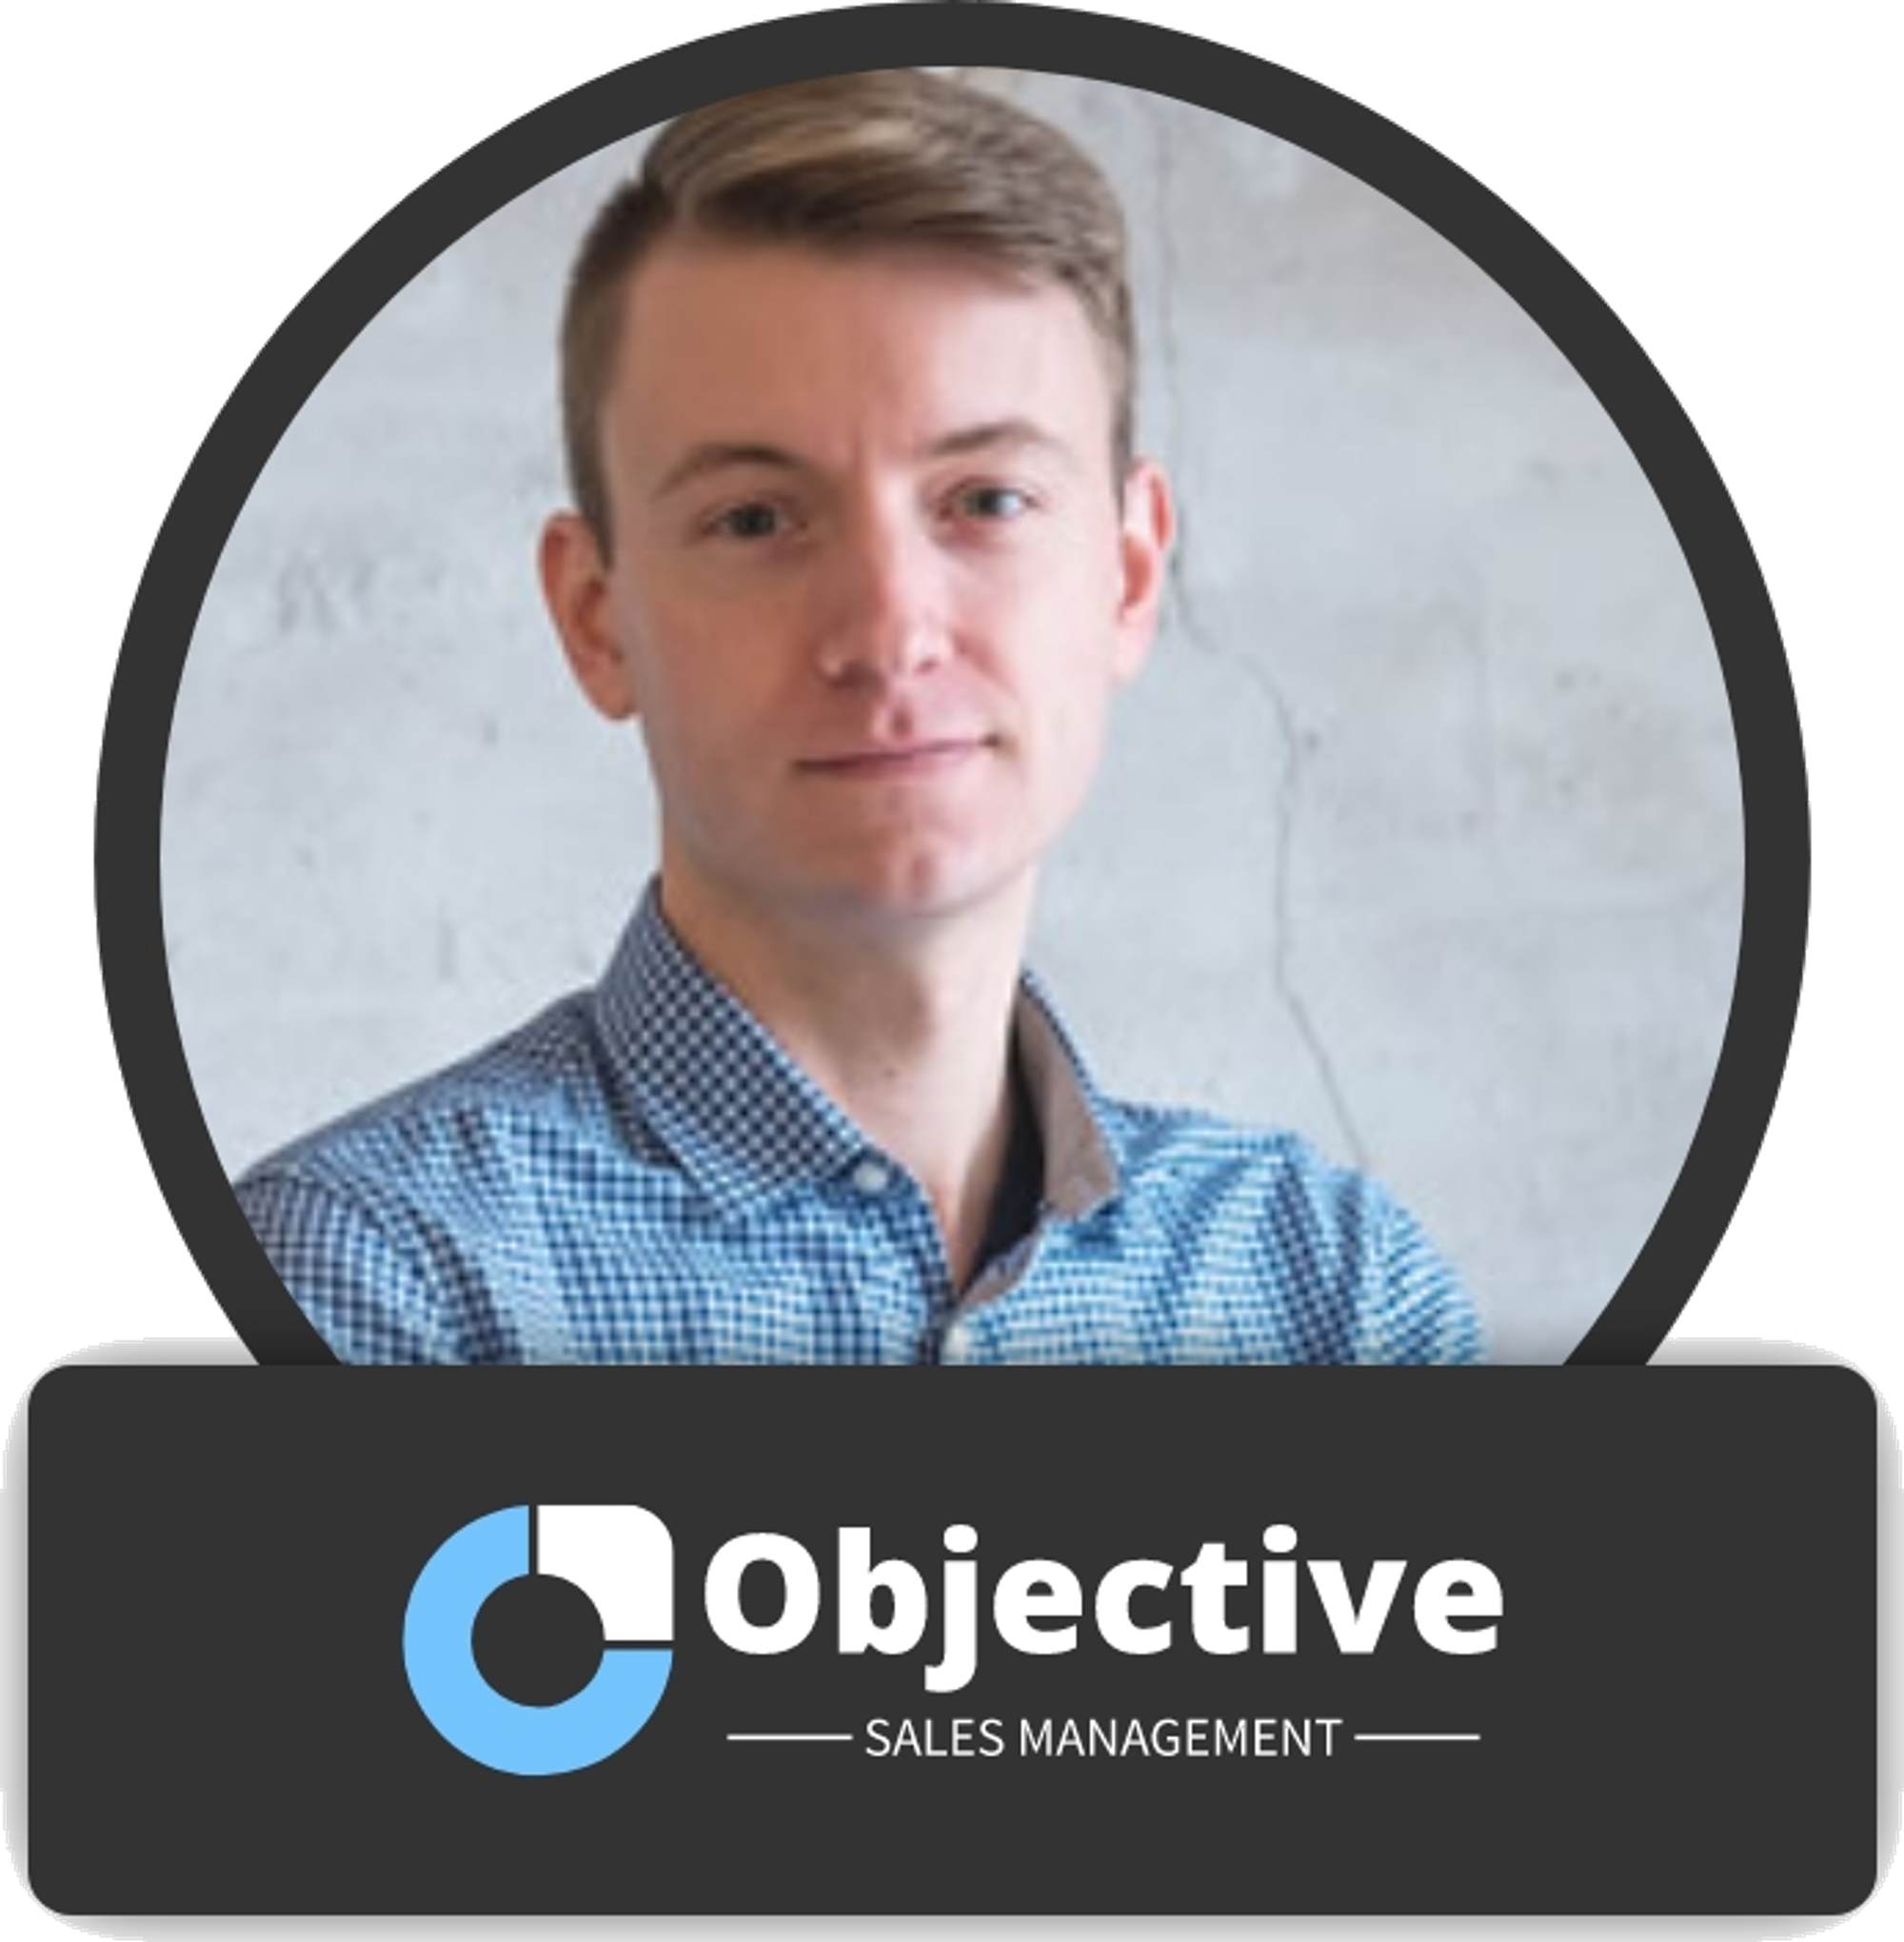 Rory Laitila
Founder and CEO of ObjectiveSalesManagement.org and SalesInsights.io 